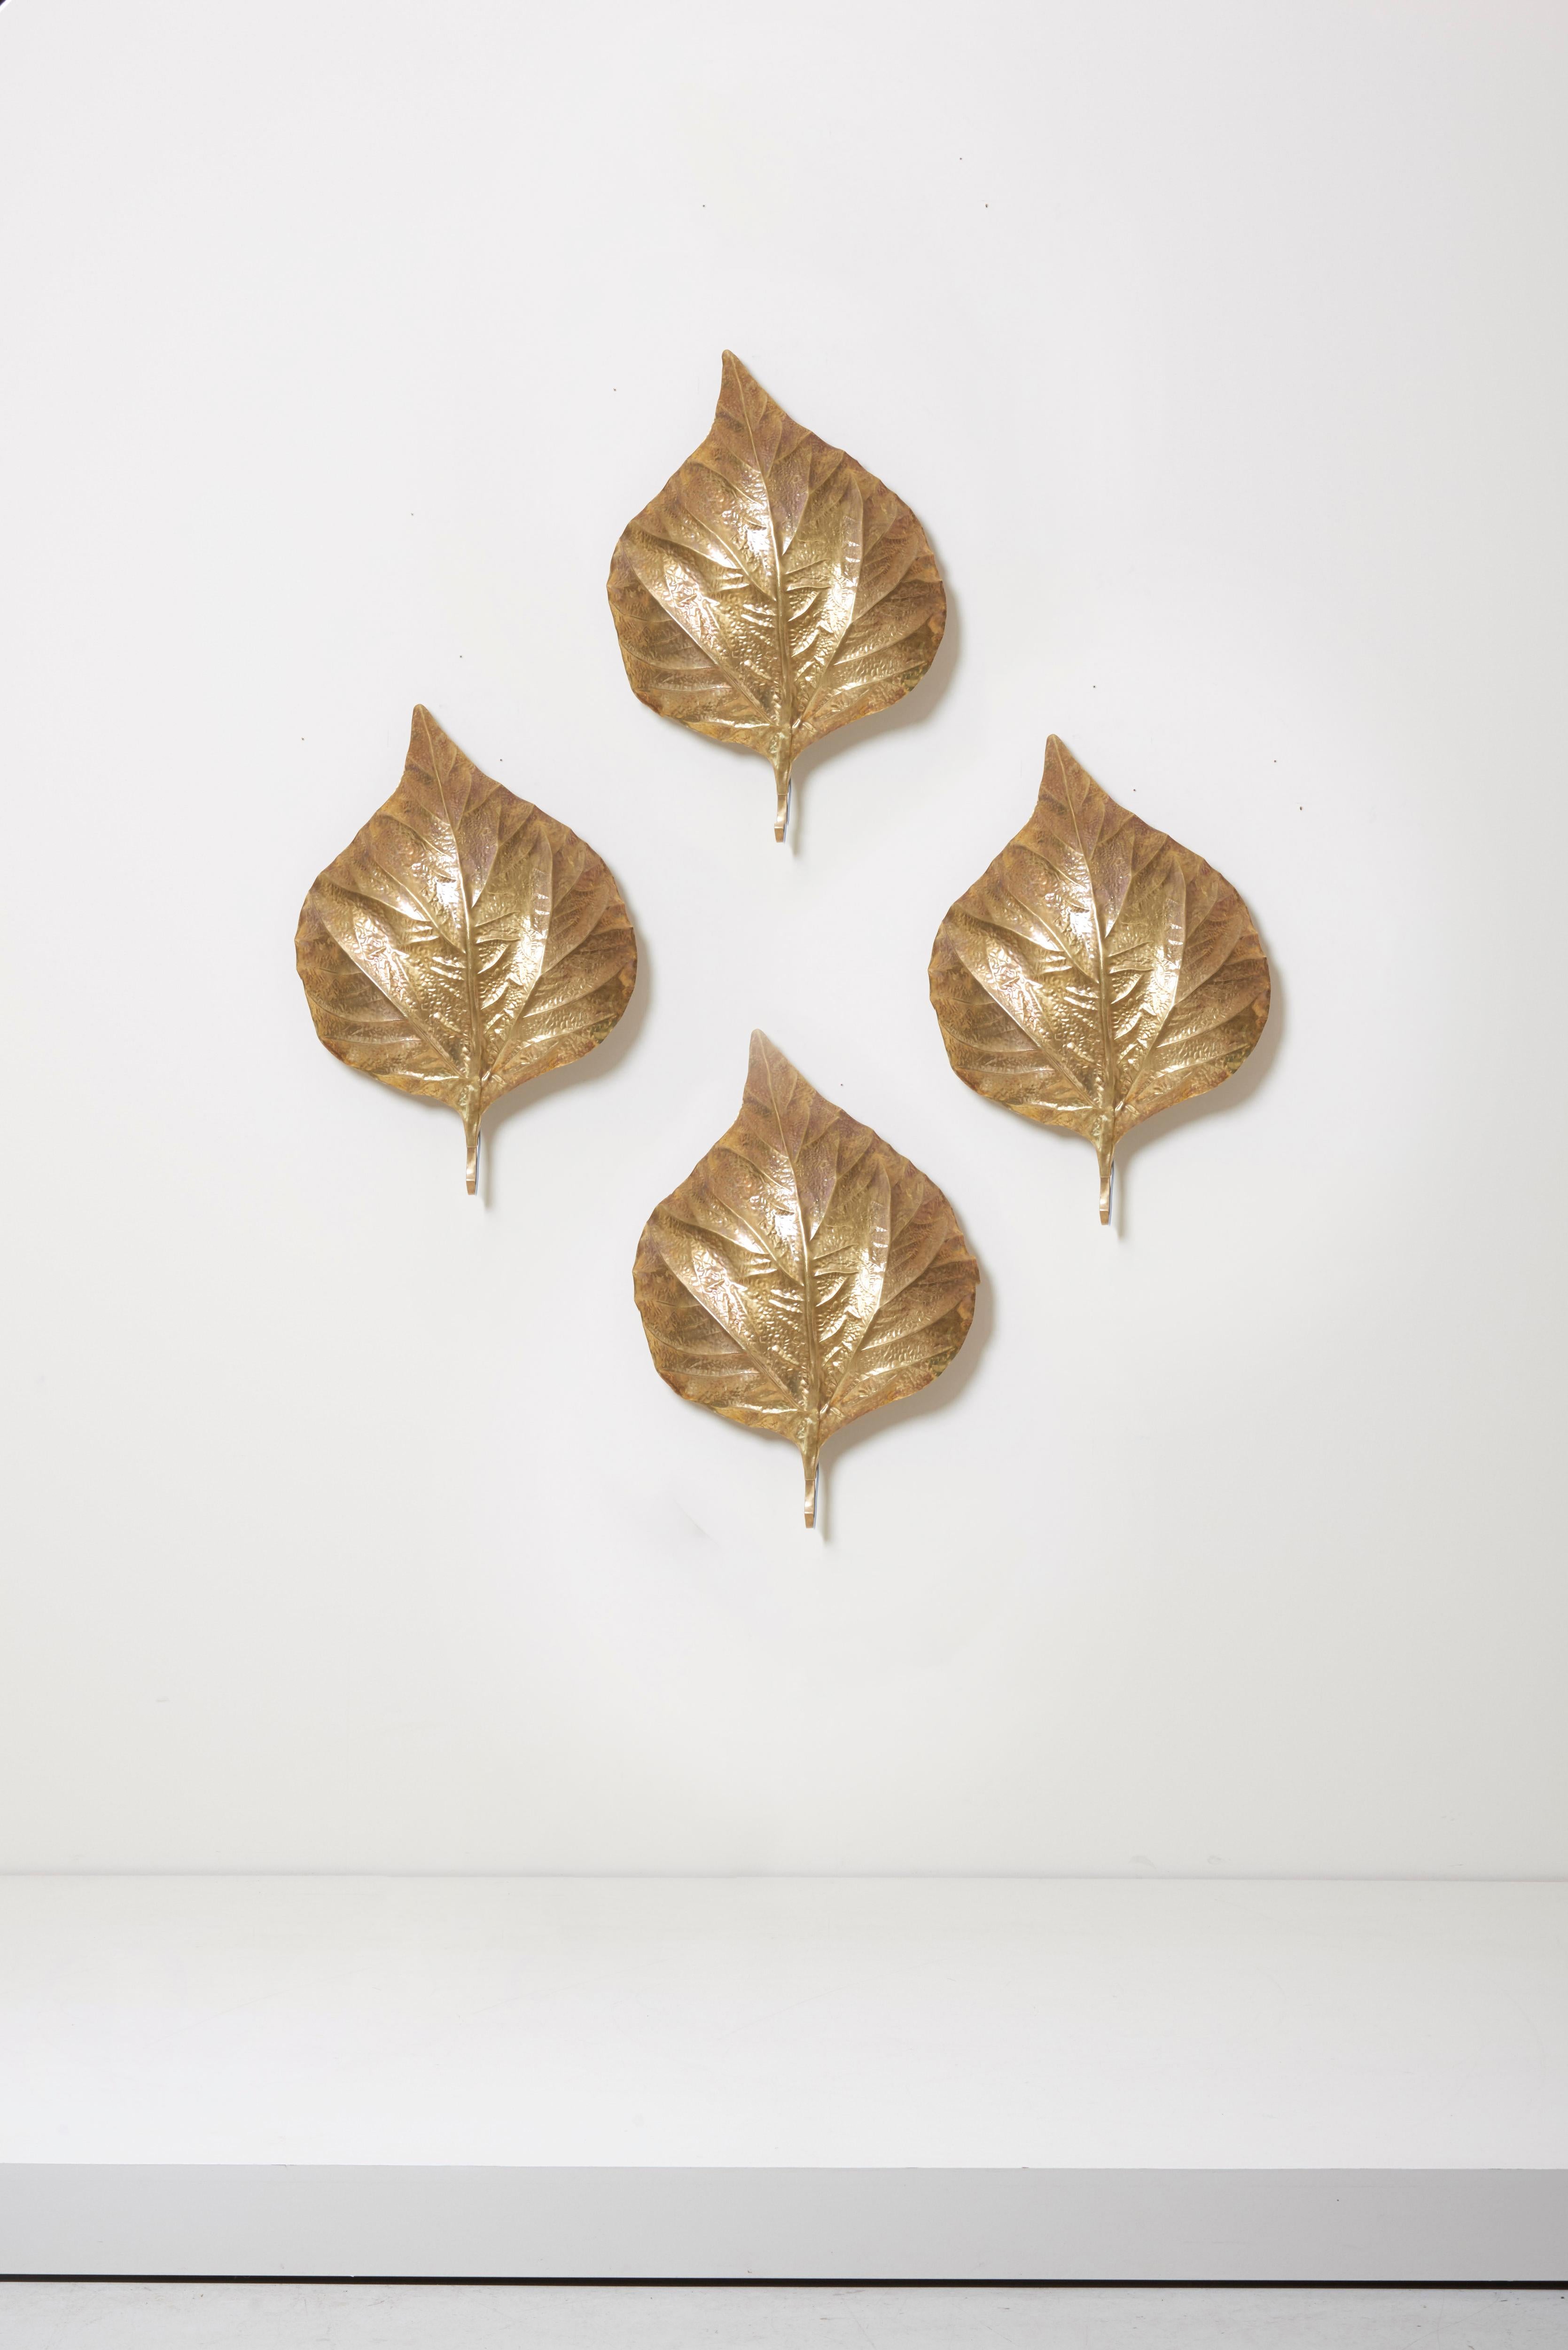 Four wonderful huge rhaburb leaf wall lamps by the italian designer Tommaso Barbi.
The lamps are made of brass and the reflexion of the light on the brass brings a cozy atmosphere in every room.
The lamps are icons of the 1970s design and they are